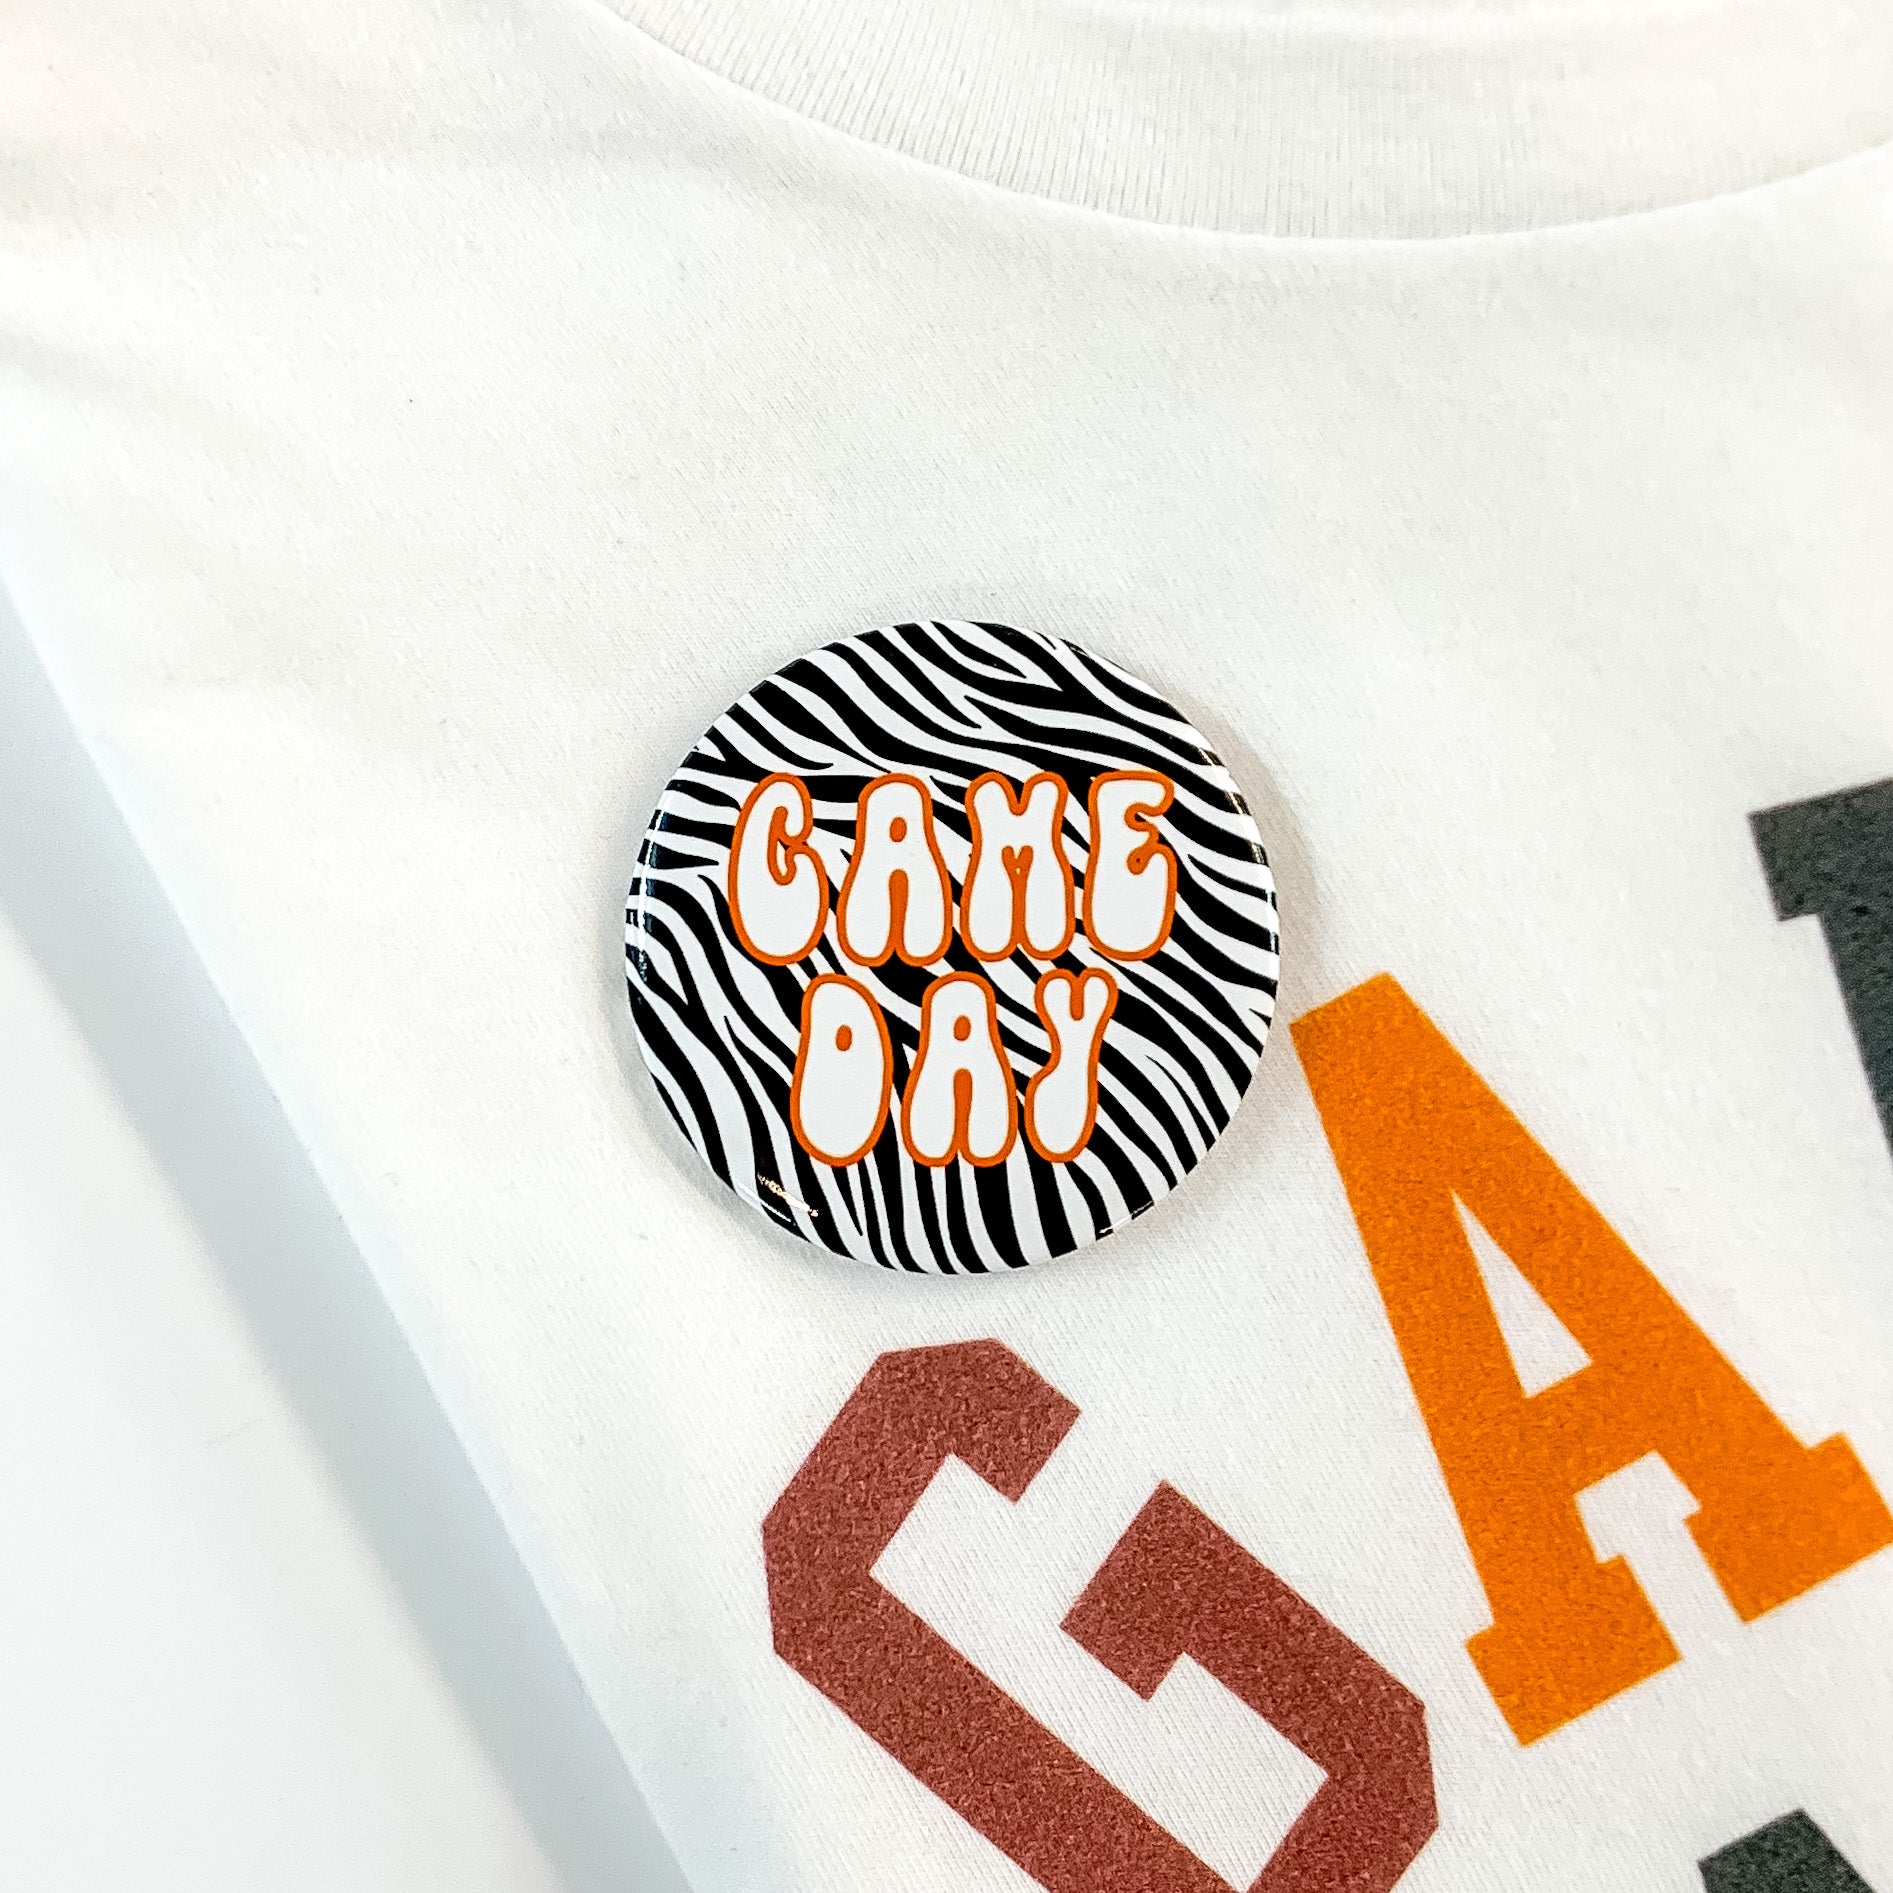 Black and white zebra print button pin pictured on a white tee shirt. This pin includes the words "GAME DAY" in white with an orange outline.  